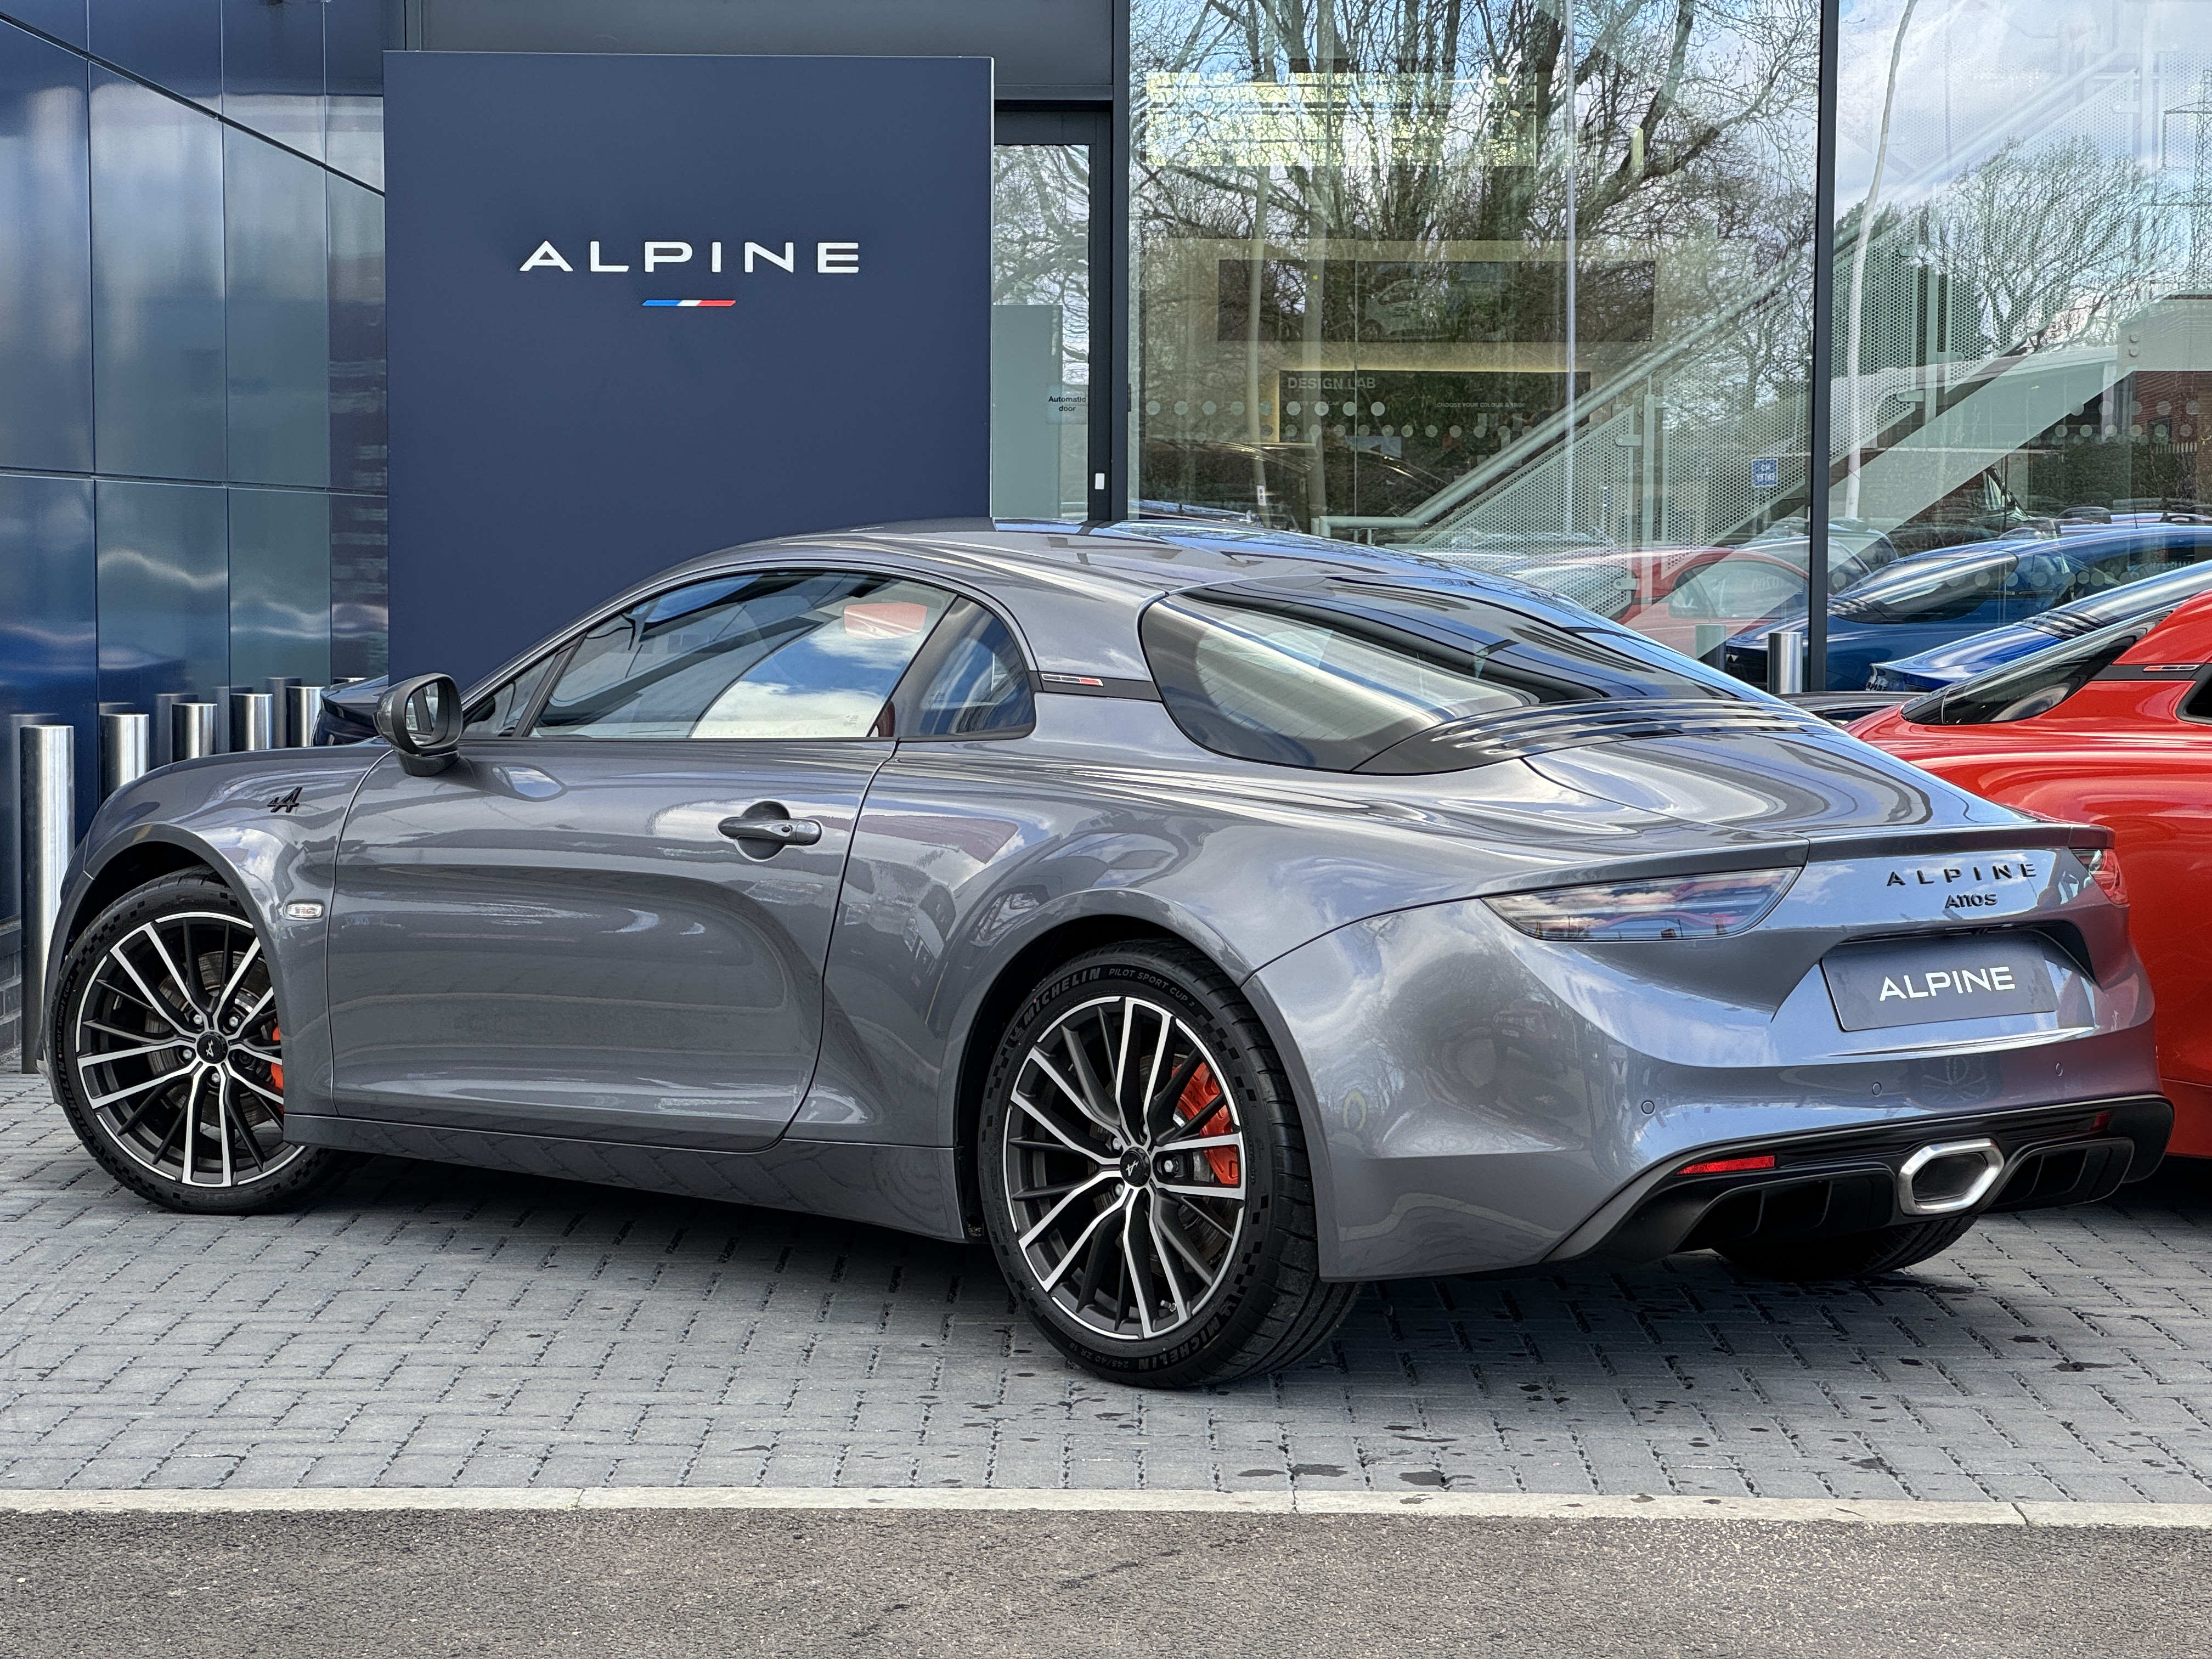 A110 1.8L TURBO 300 S 2DR DCT COUPE